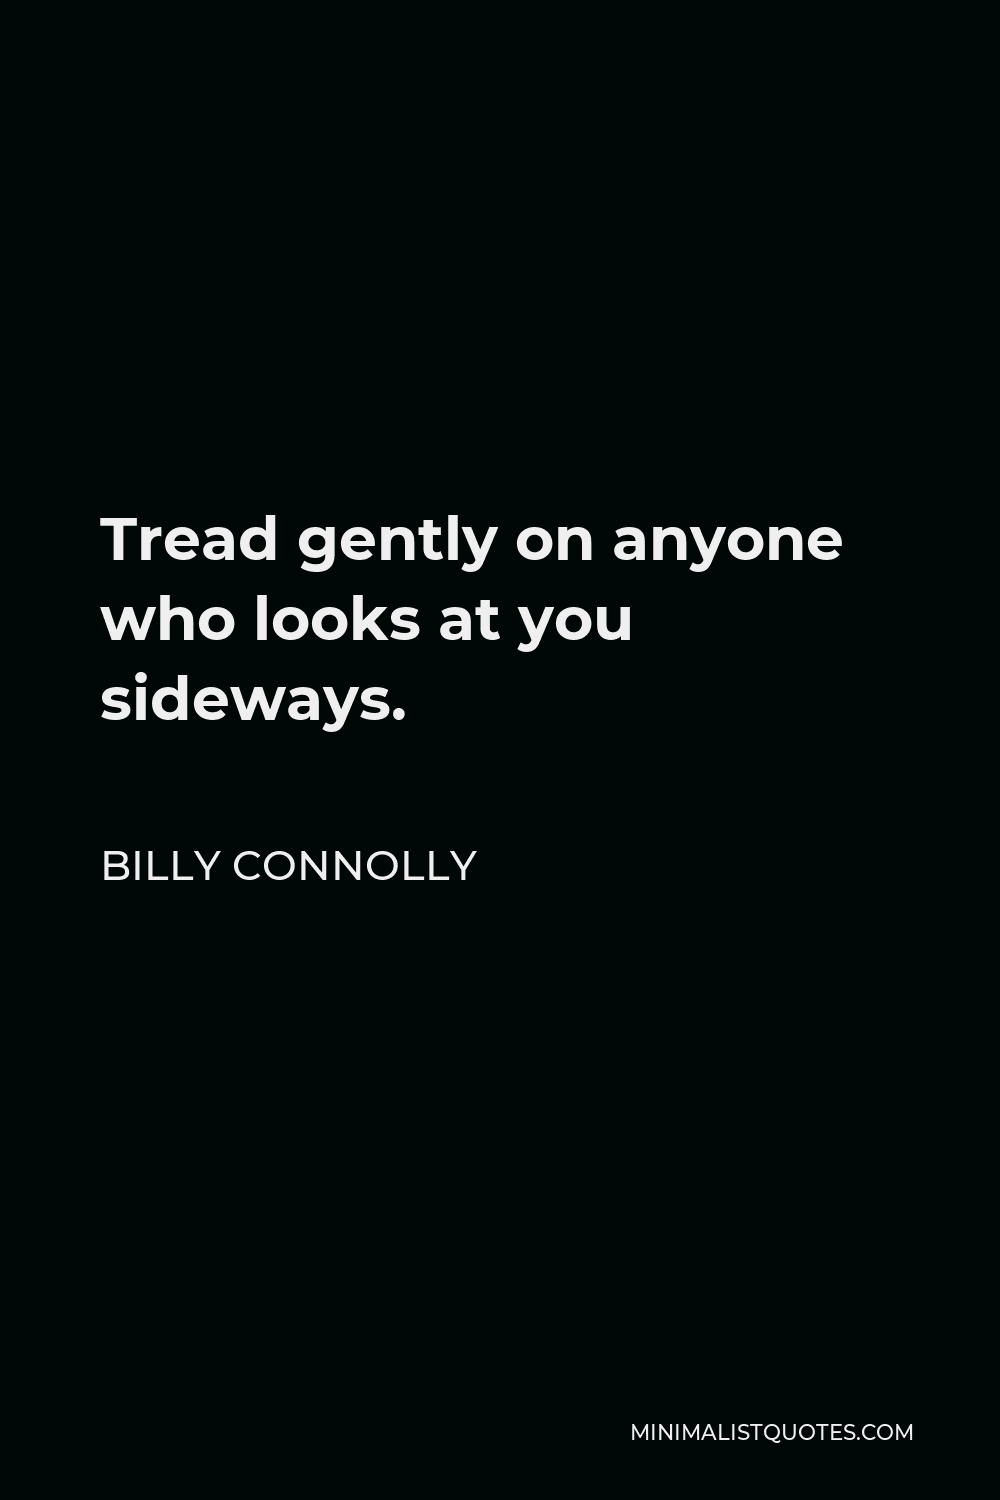 Billy Connolly Quote - Tread gently on anyone who looks at you sideways.